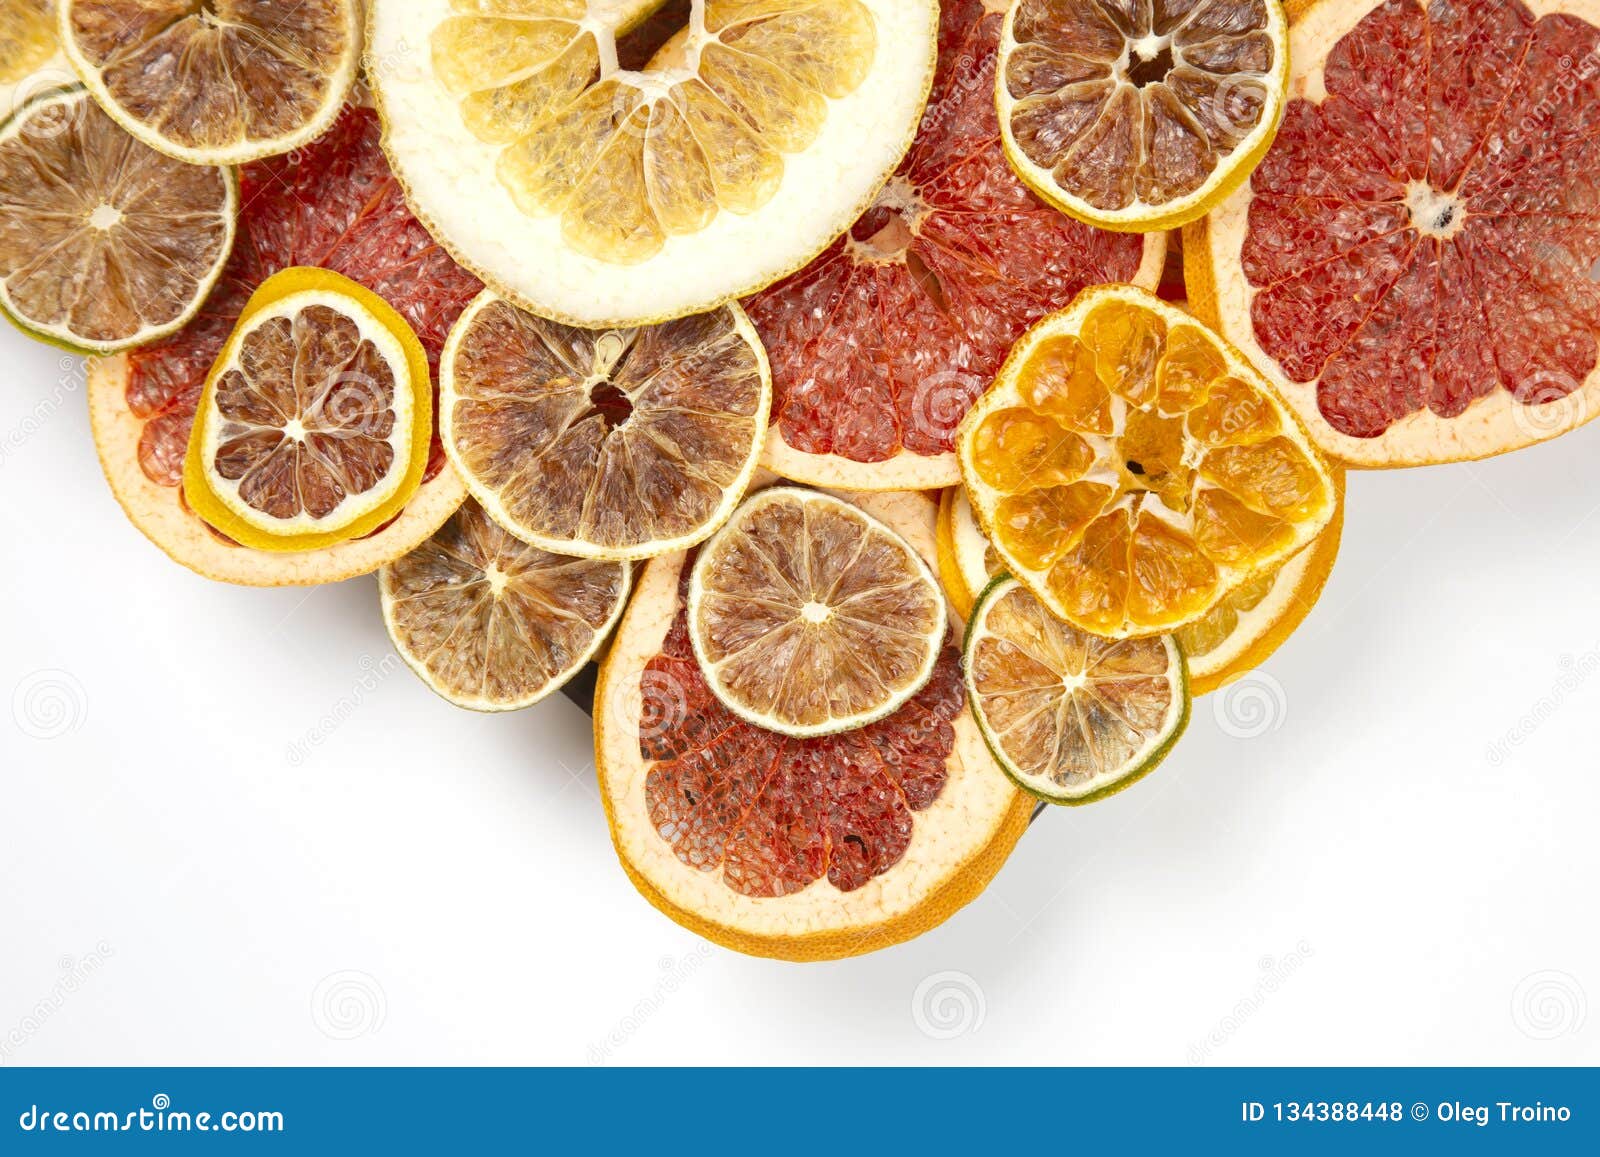 Dried Slices of Various Citrus Fruits on White Background Stock Photo ...